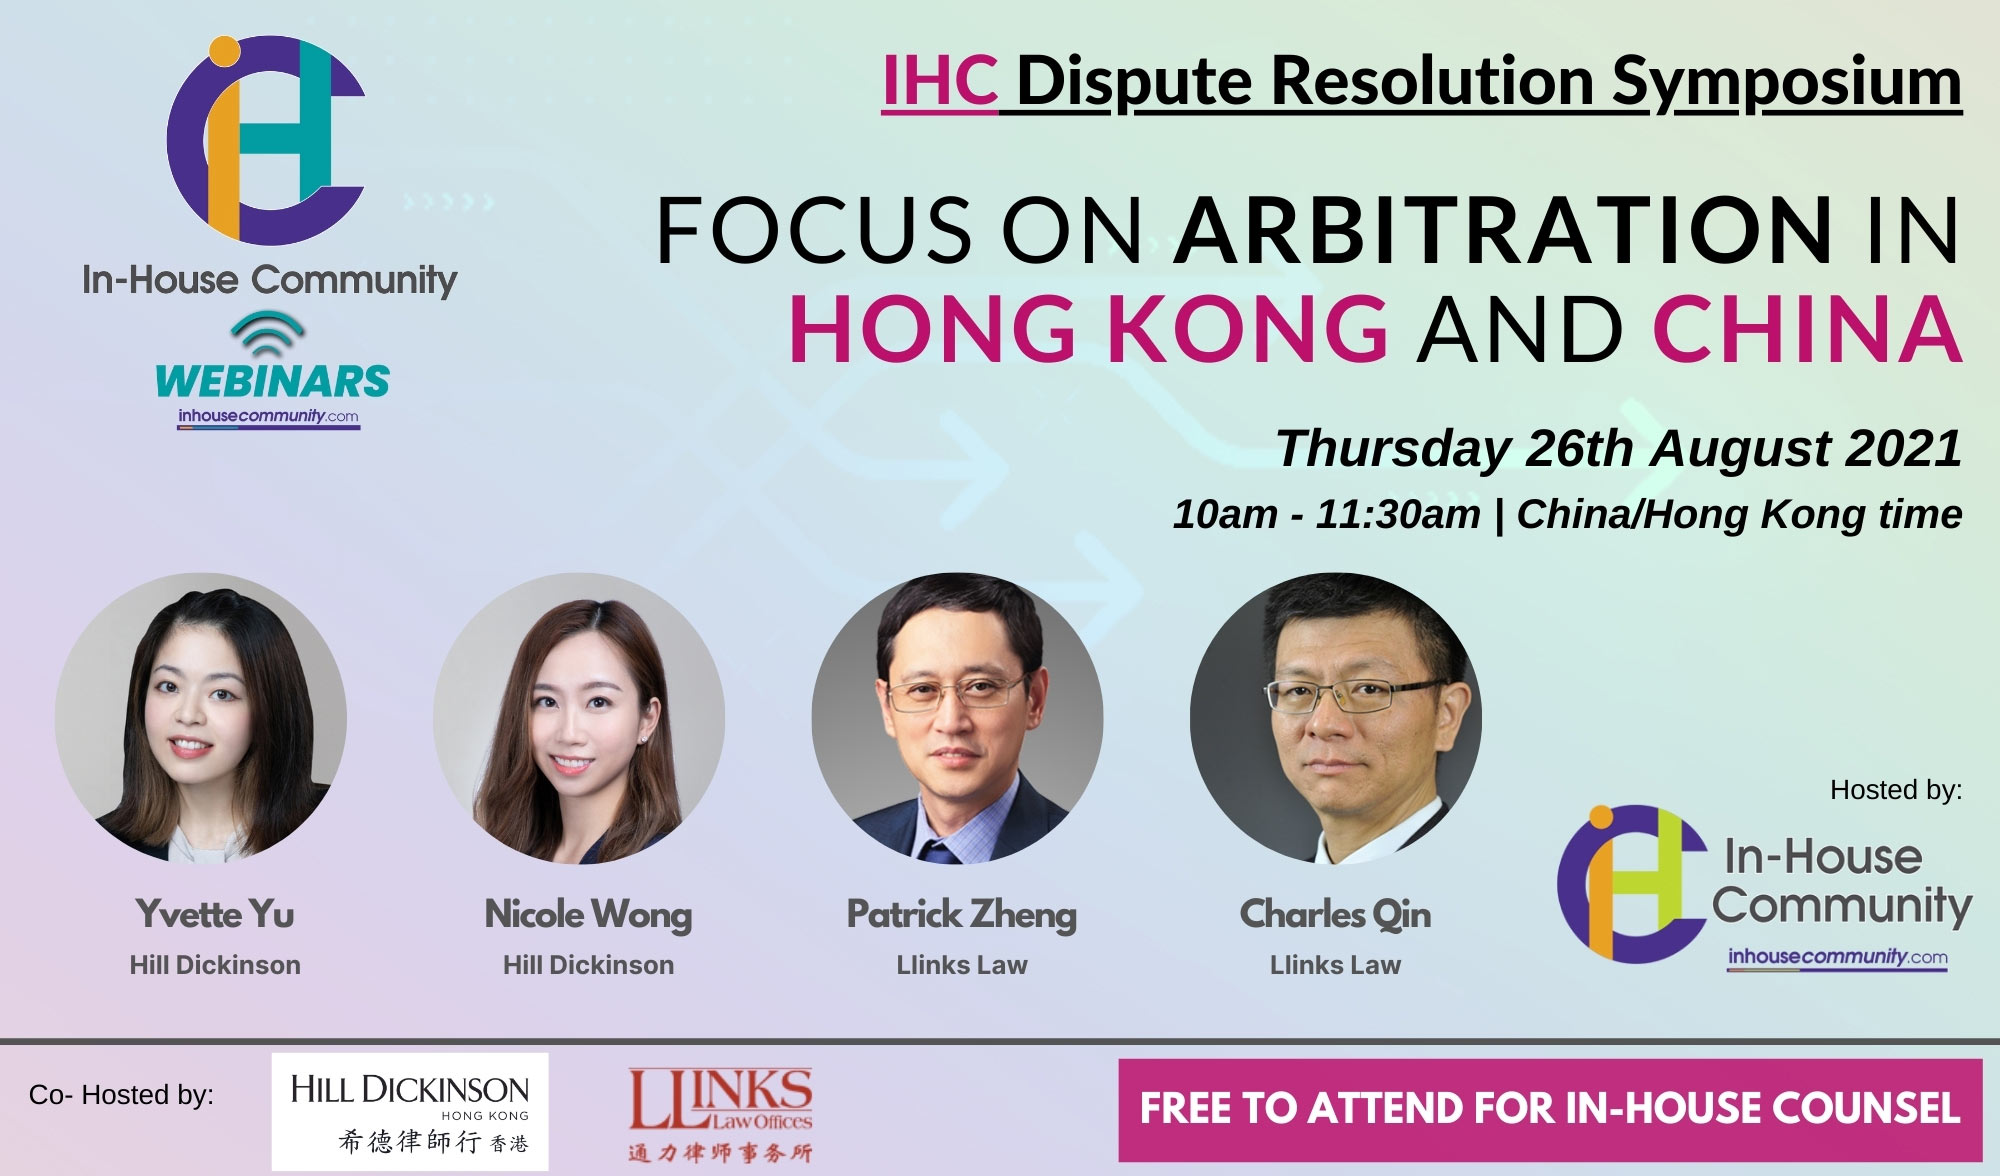 IHC Dispute Resolution Symposium: Focus on Arbitration in Hong Kong and China